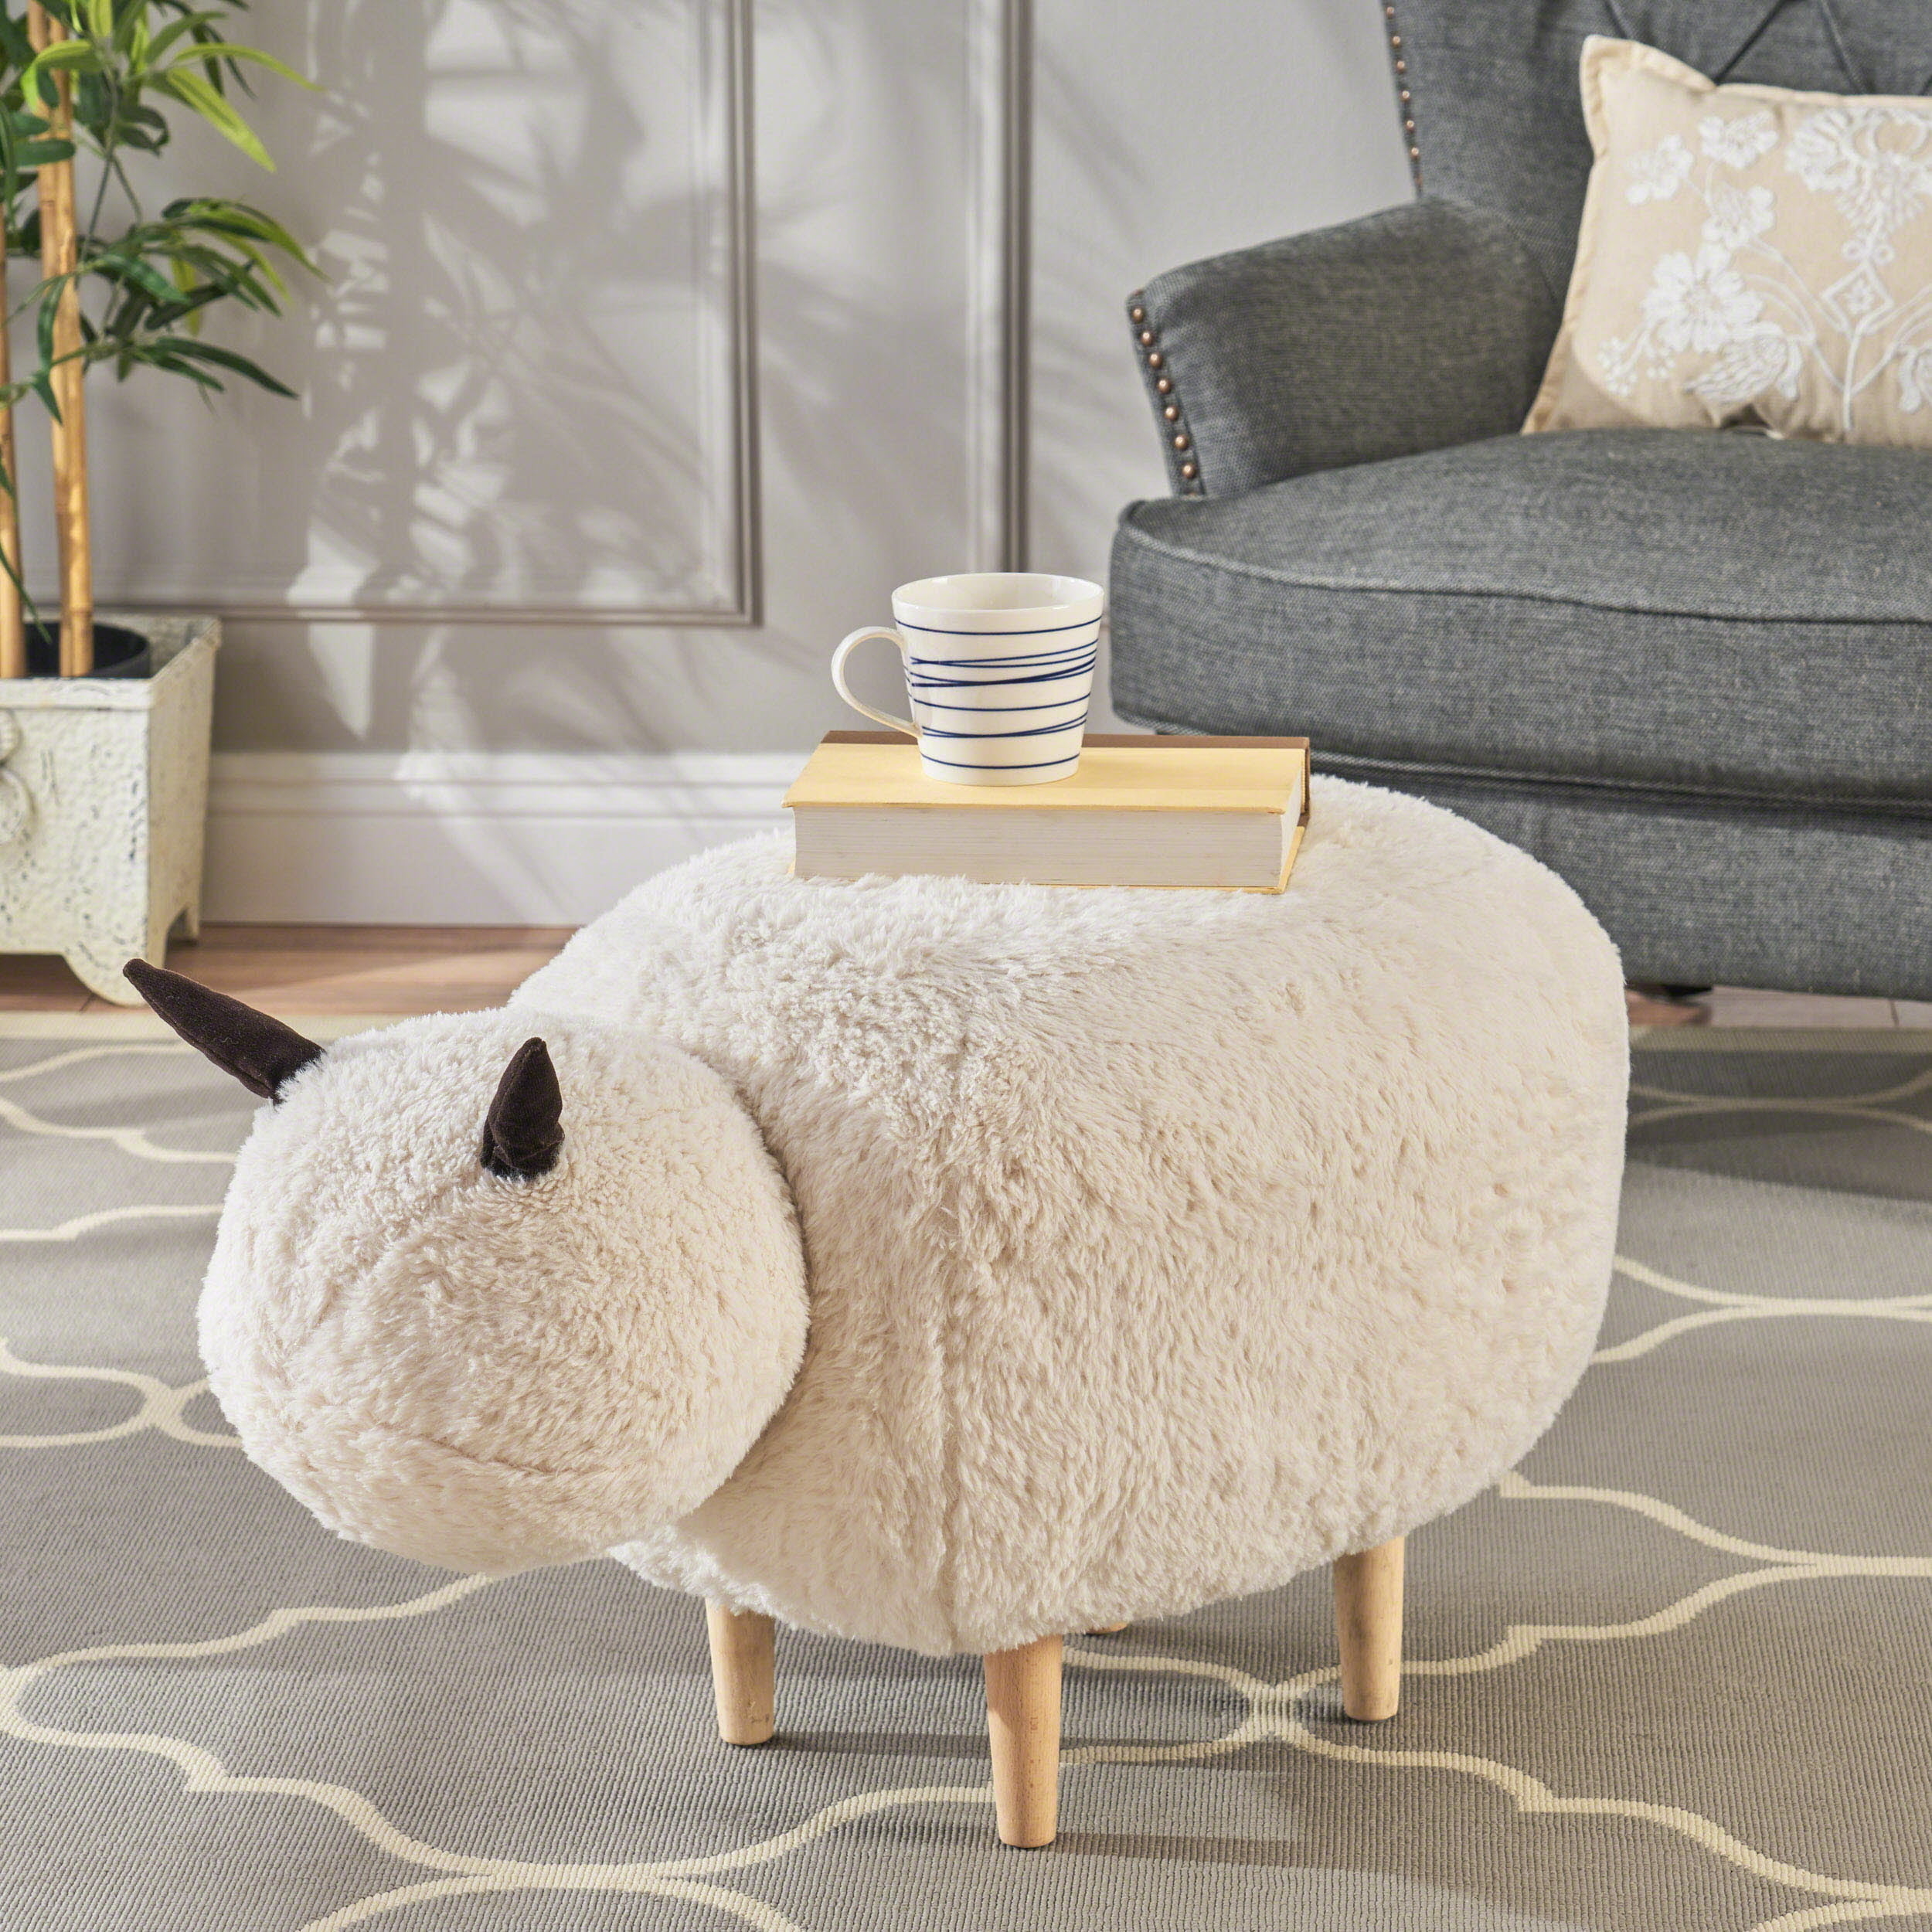 the sheep ottoman with two black ears and wooden legs